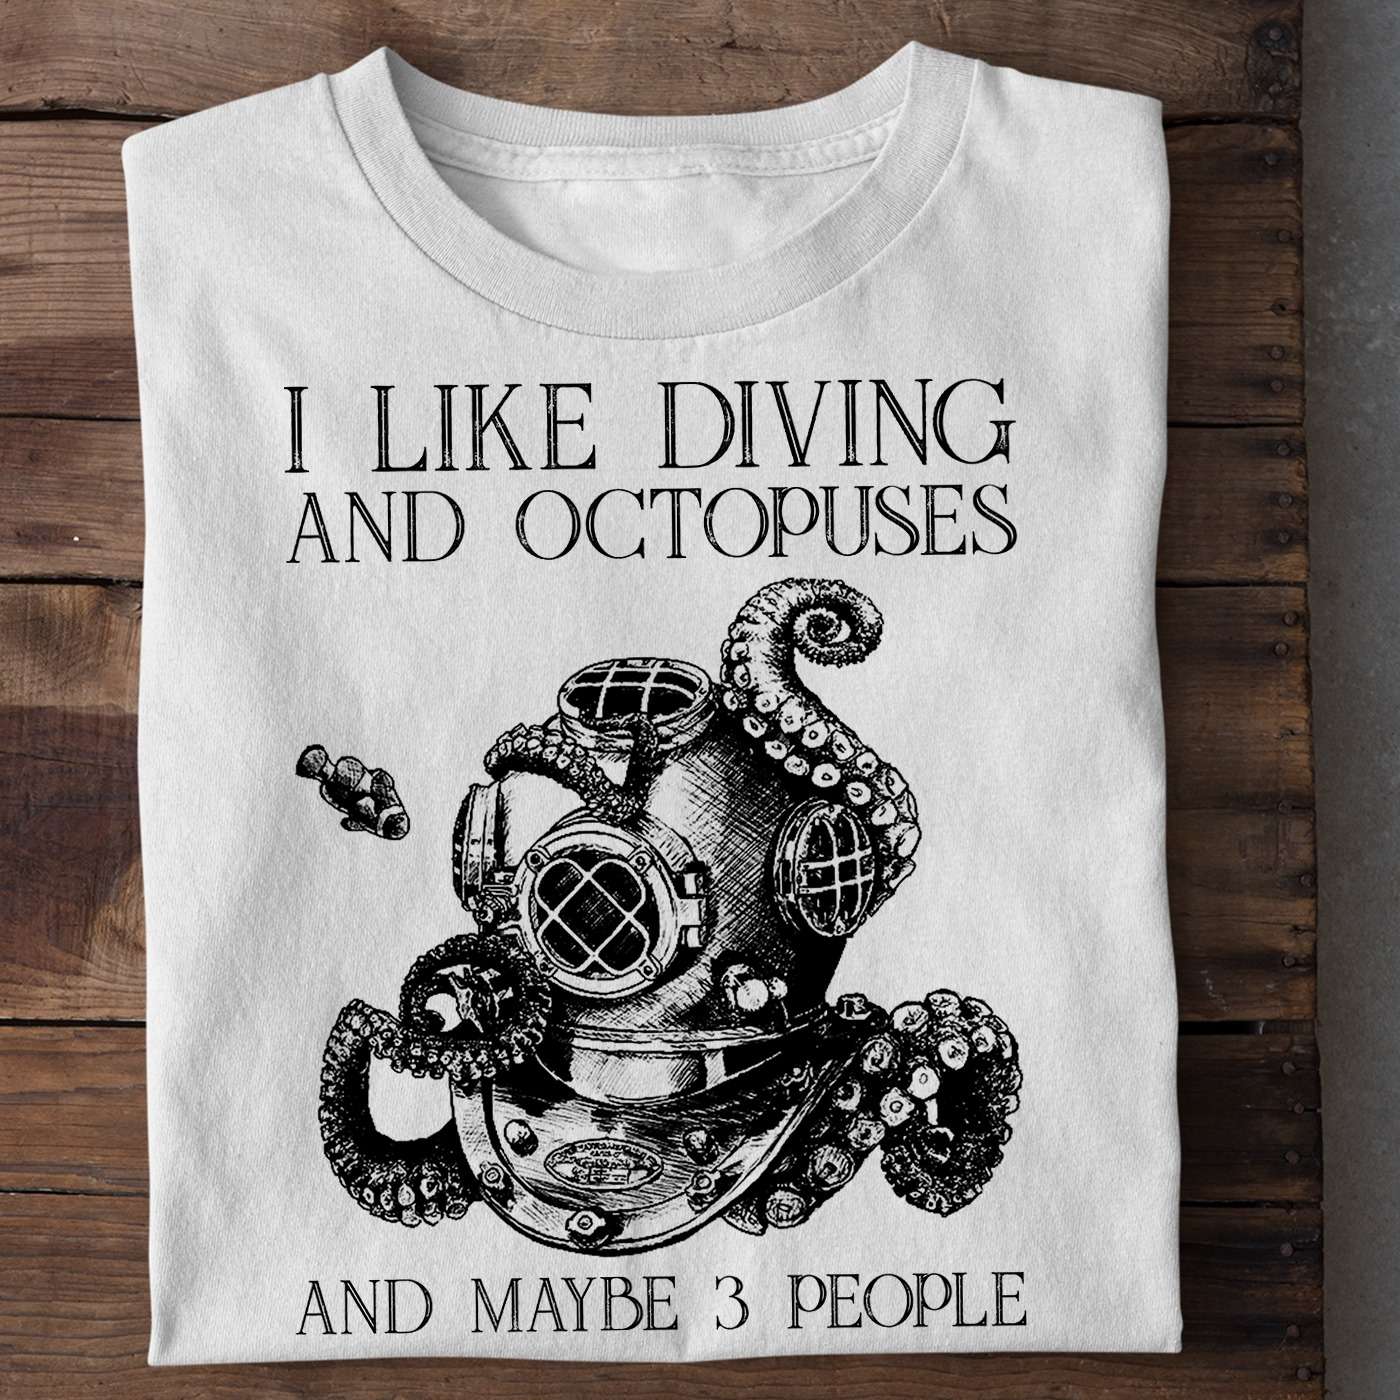 I like diving and octopuses and maybe 3 people - Love diving